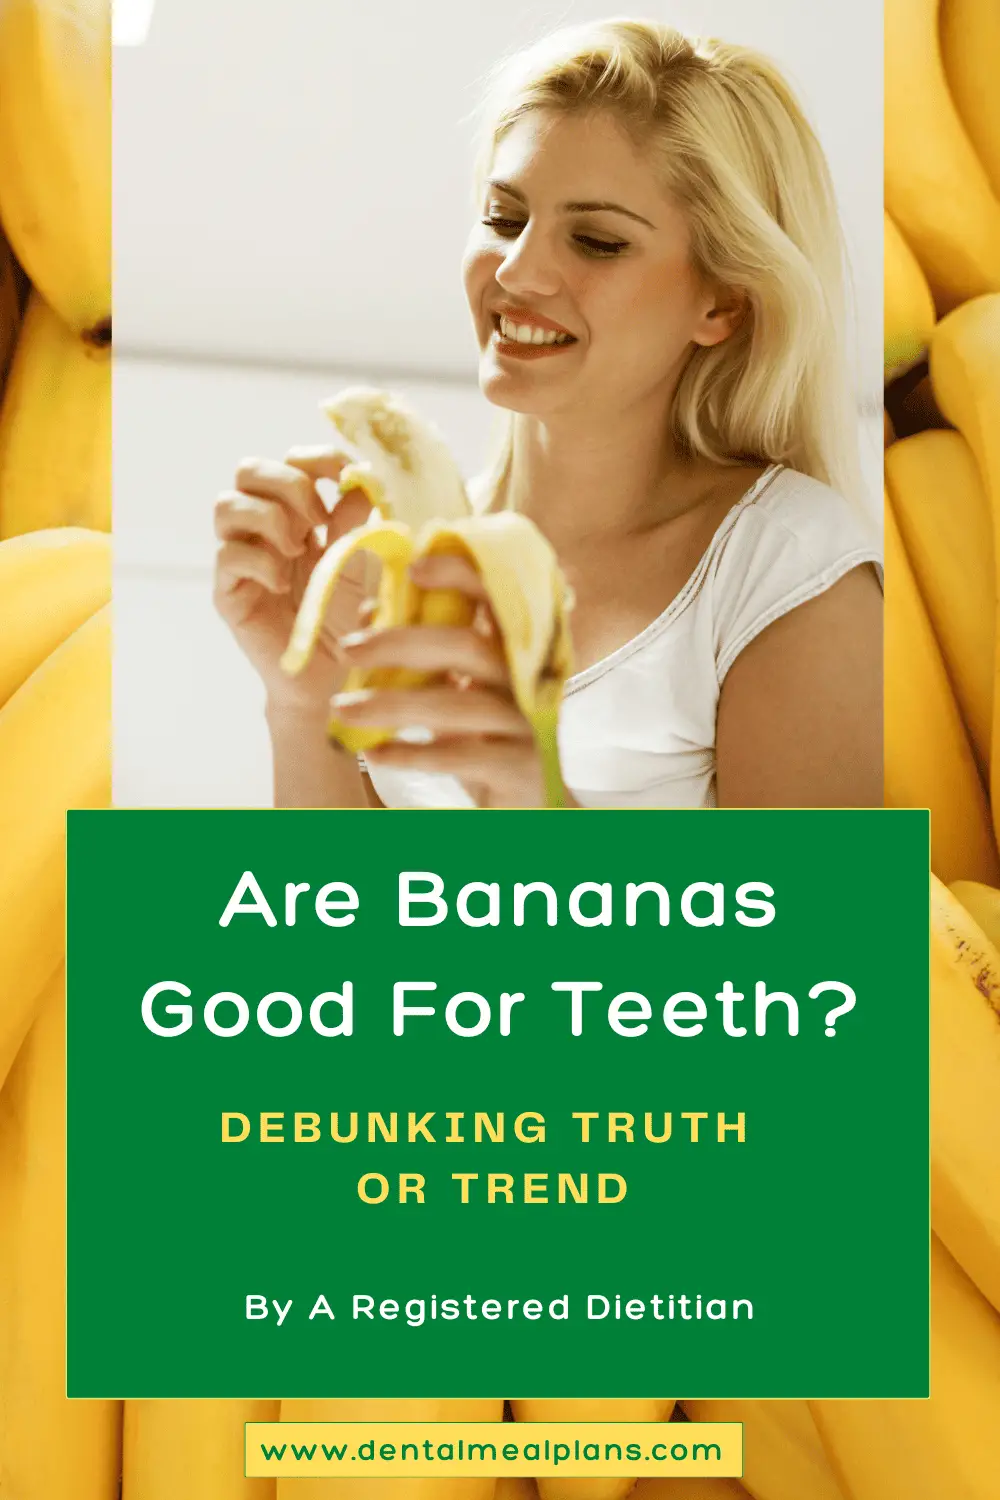 are bananas good for teeth? debunking truth or trend by a registered dietitian